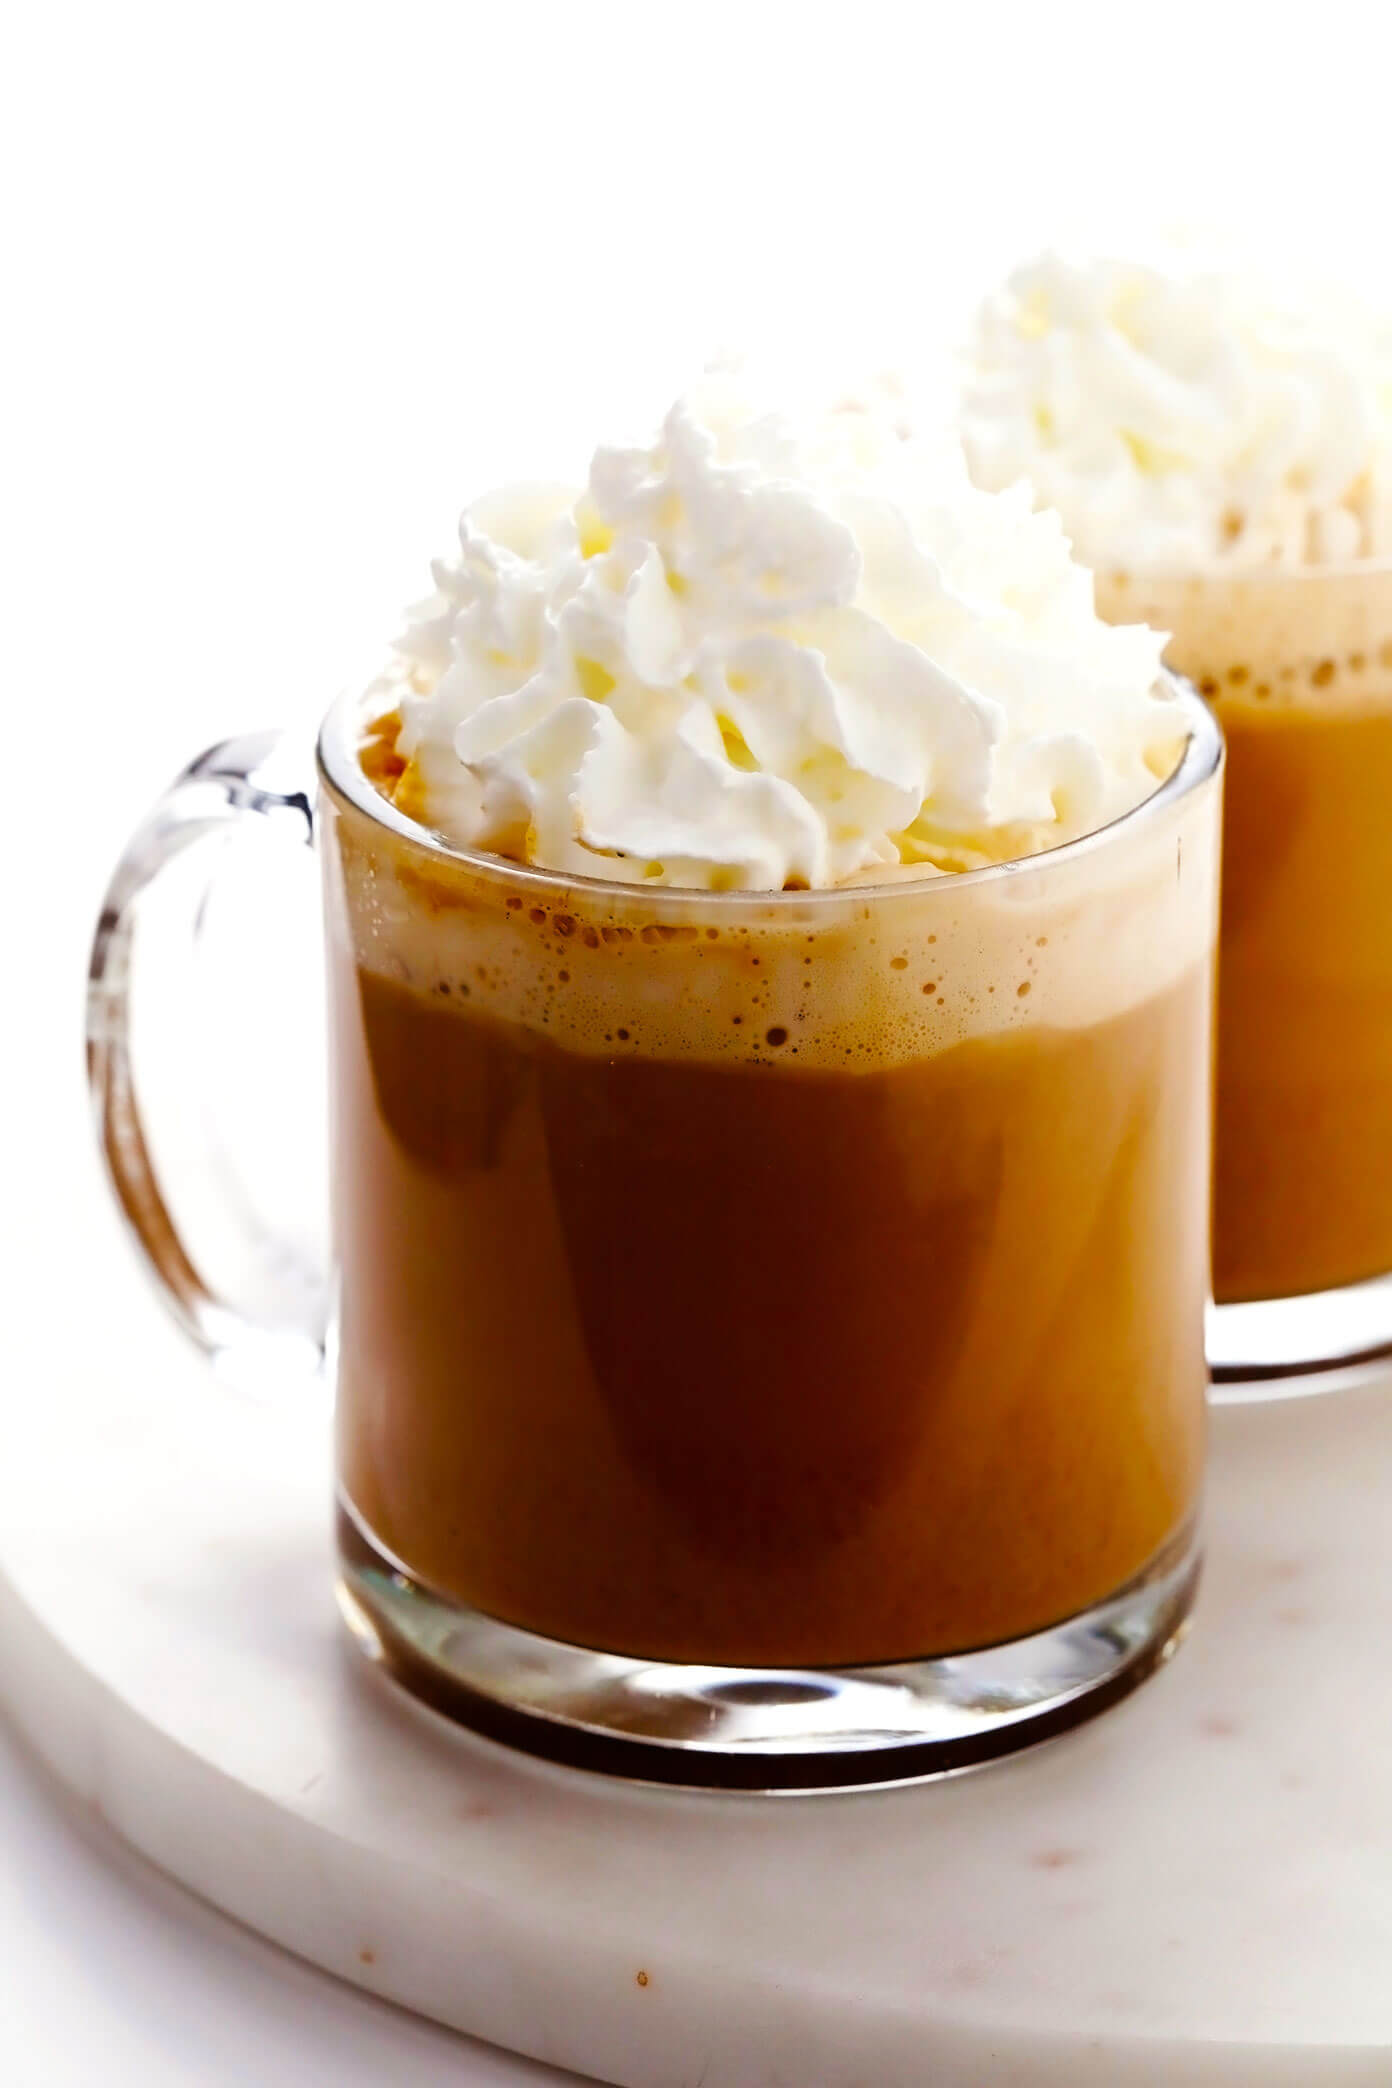 Homemade Pumpkin Spice Latte with Whipped Cream